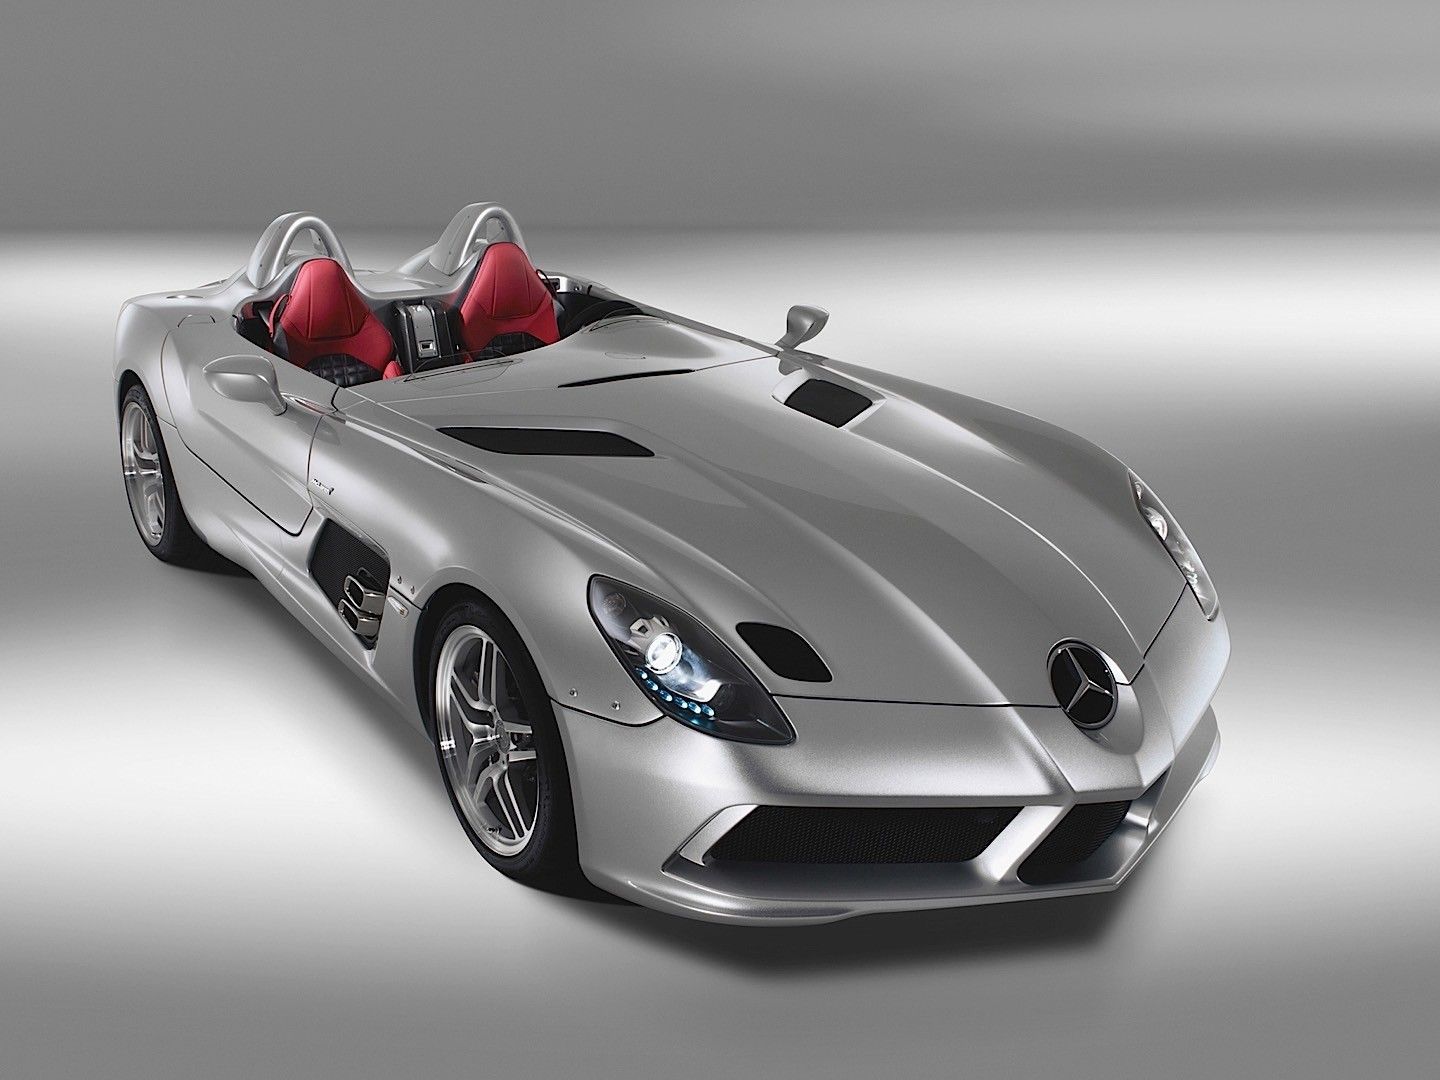 MERCEDES-BENZ-SLR-Stirling-Moss 75 Run Limited Edition